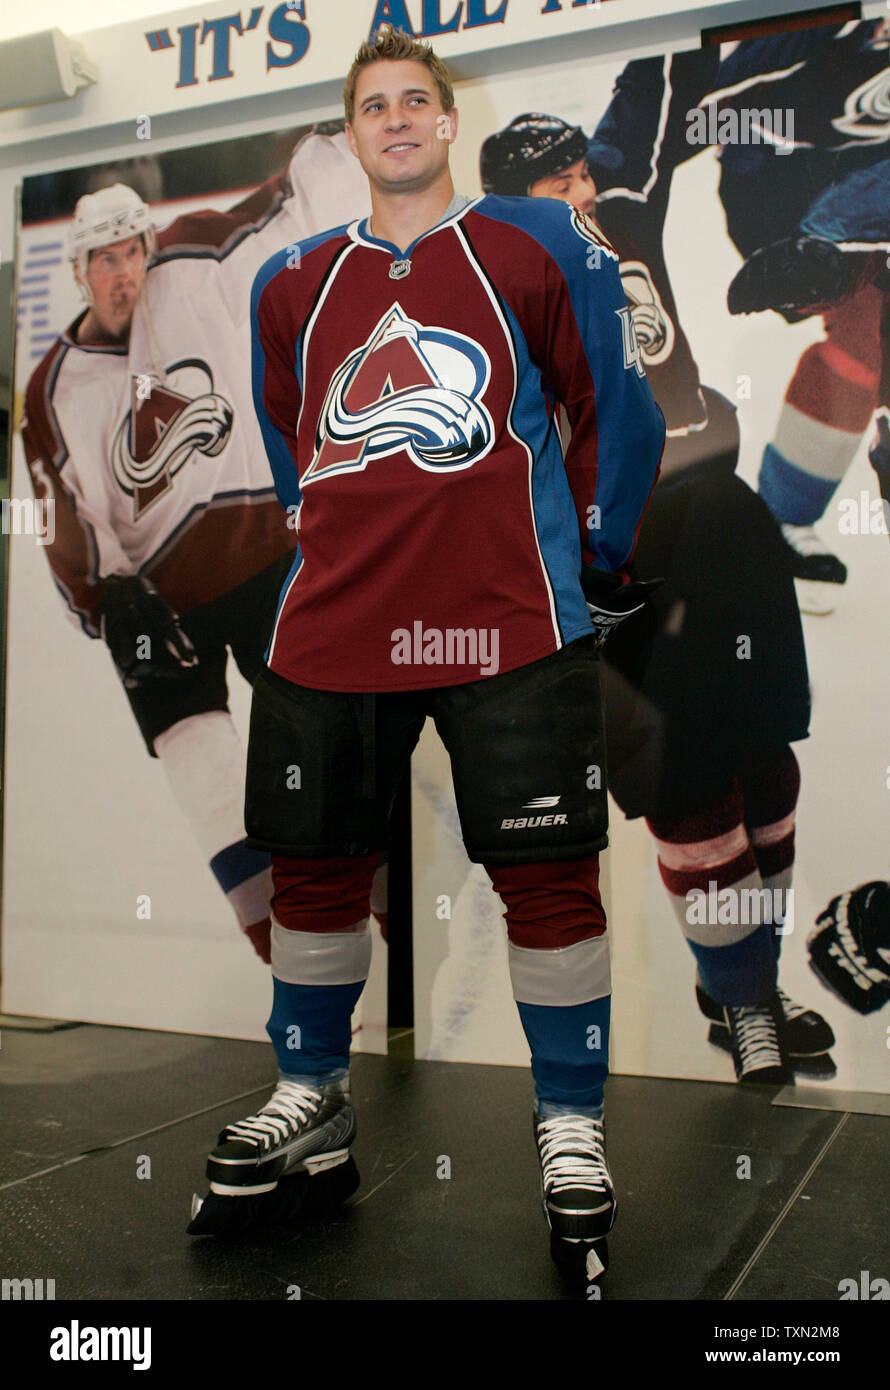 colorado-avalanche-defenseman-john-michael-liles-models-the-new-reebok-designed-nhl-and-avalanche-uniform-during-a-press-conference-at-the-pepsi-center-in-denver-on-september-12-2007-the-new-uniforms-unveiled-league-wide-today-will-improve-player-performance-and-safety-upi-photogary-c-caskey-TXN2M8.jpg